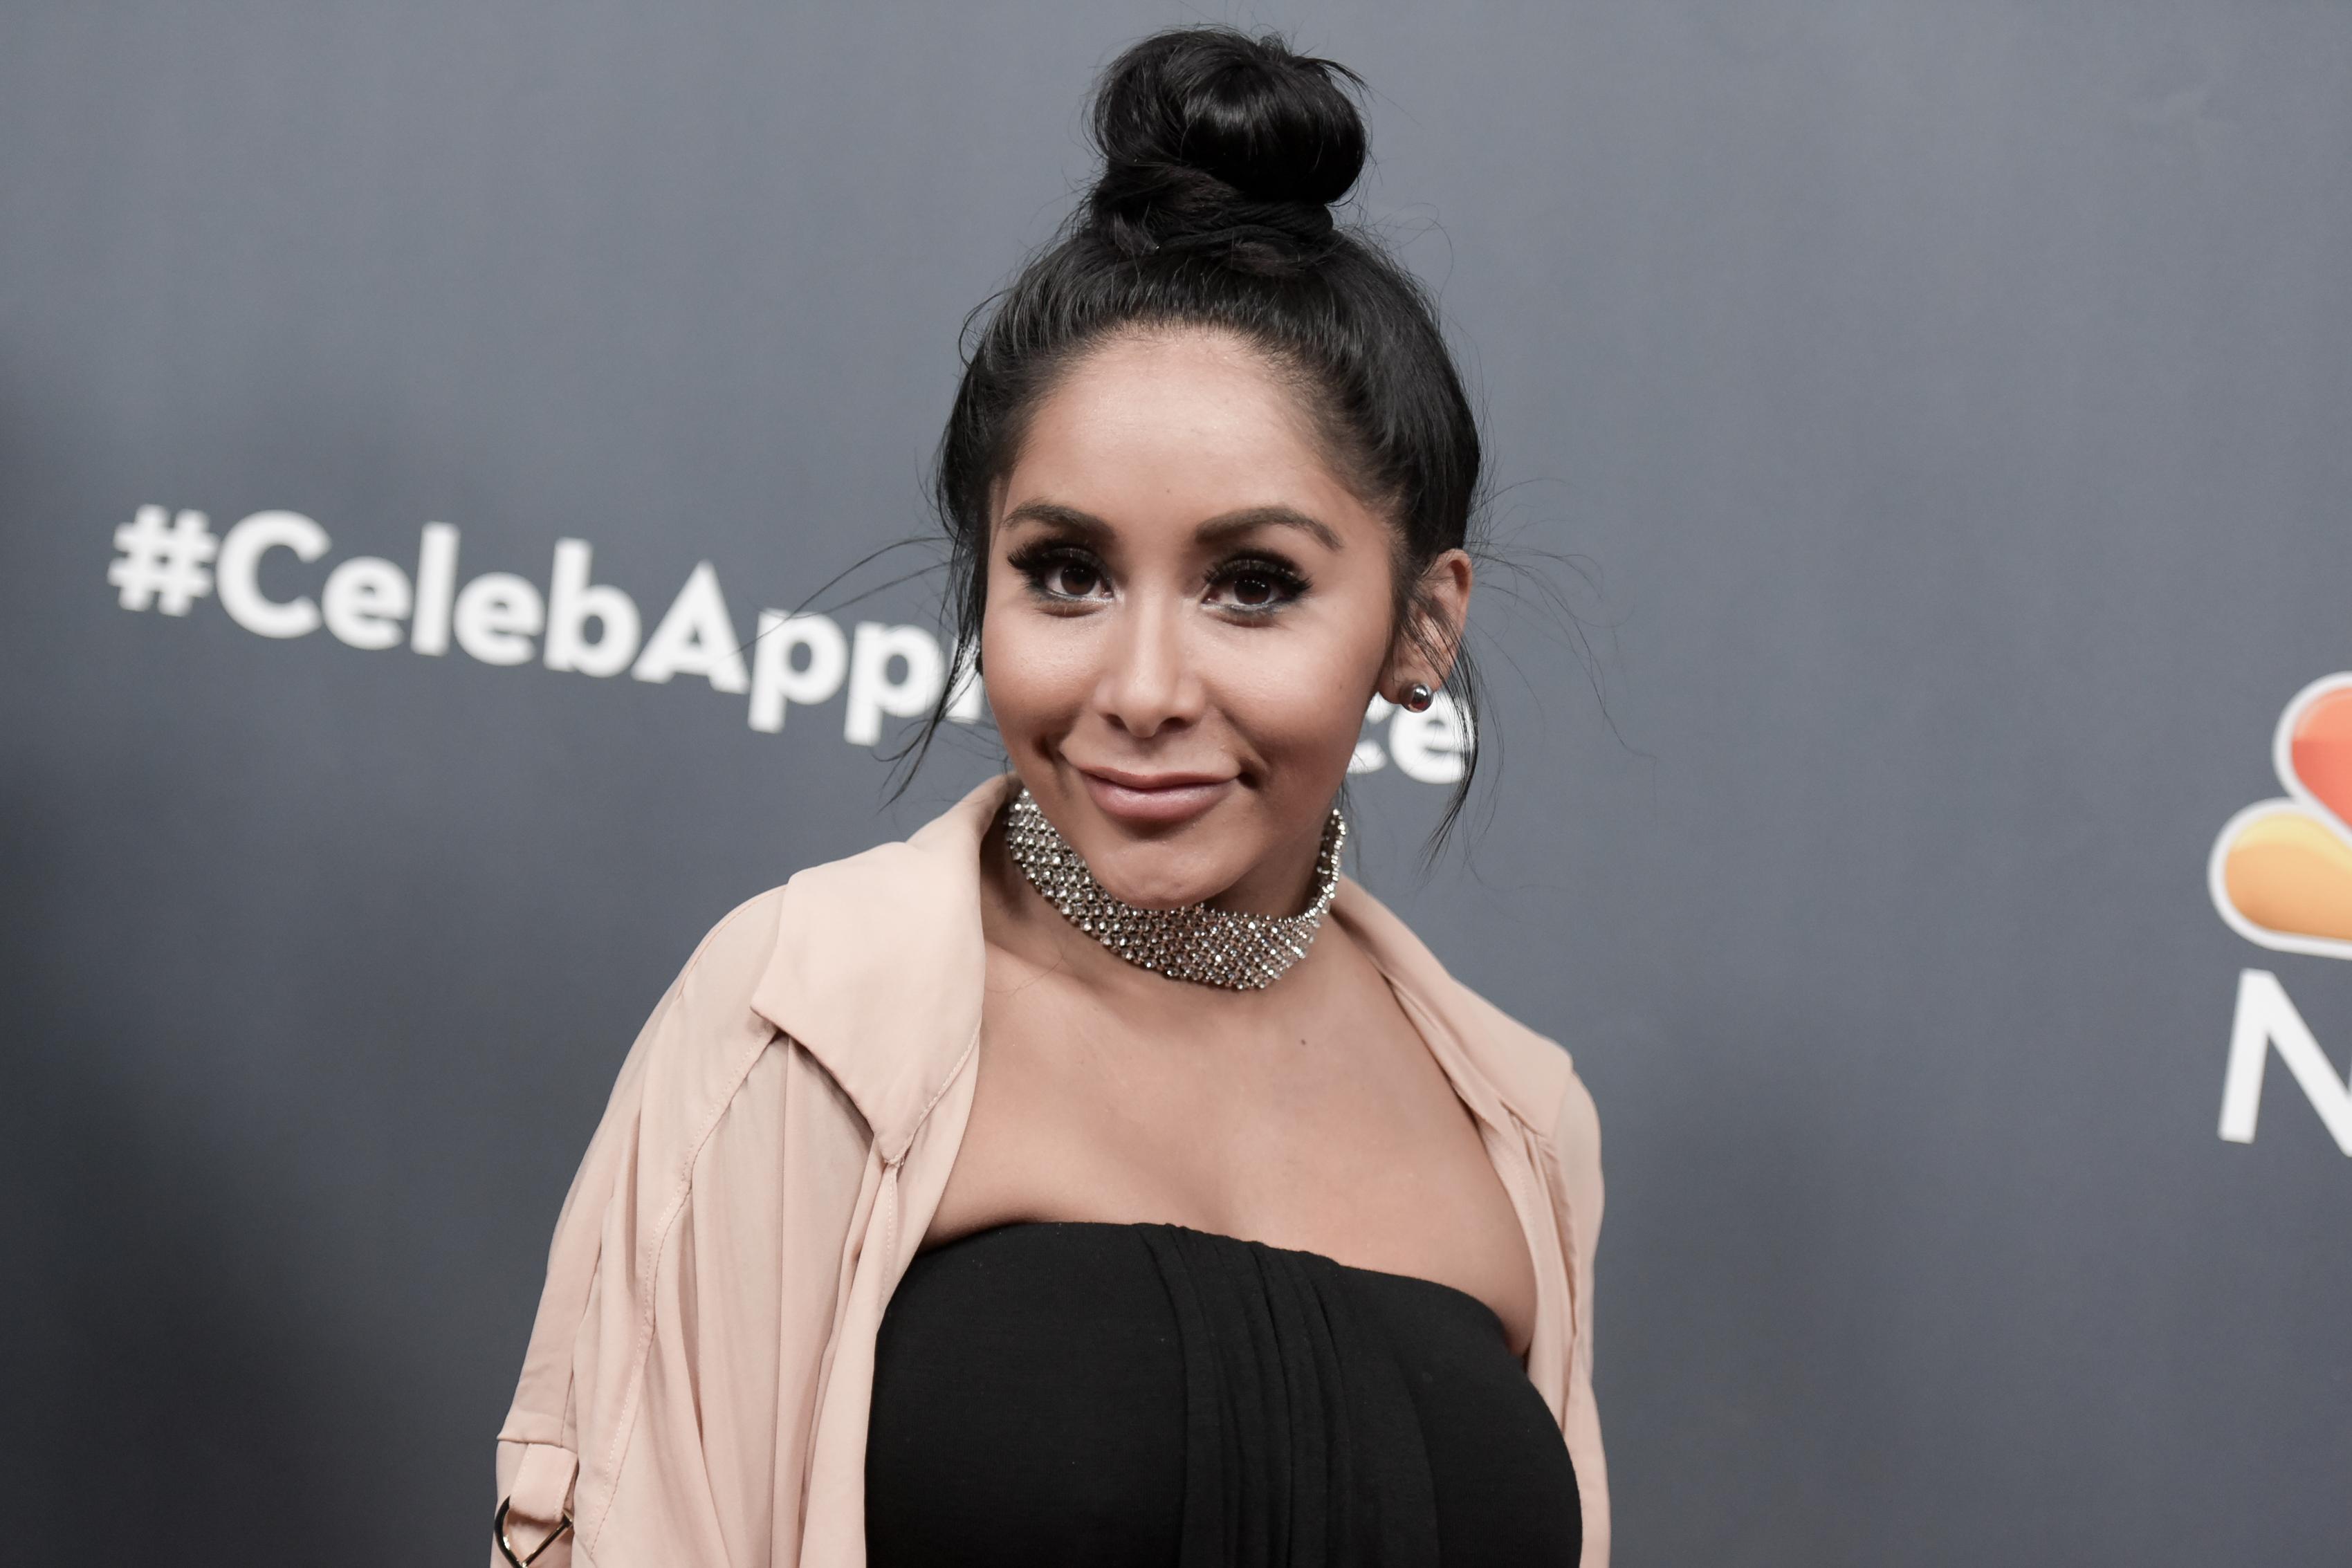 Snooki to Trump: Worry about the US, not TV